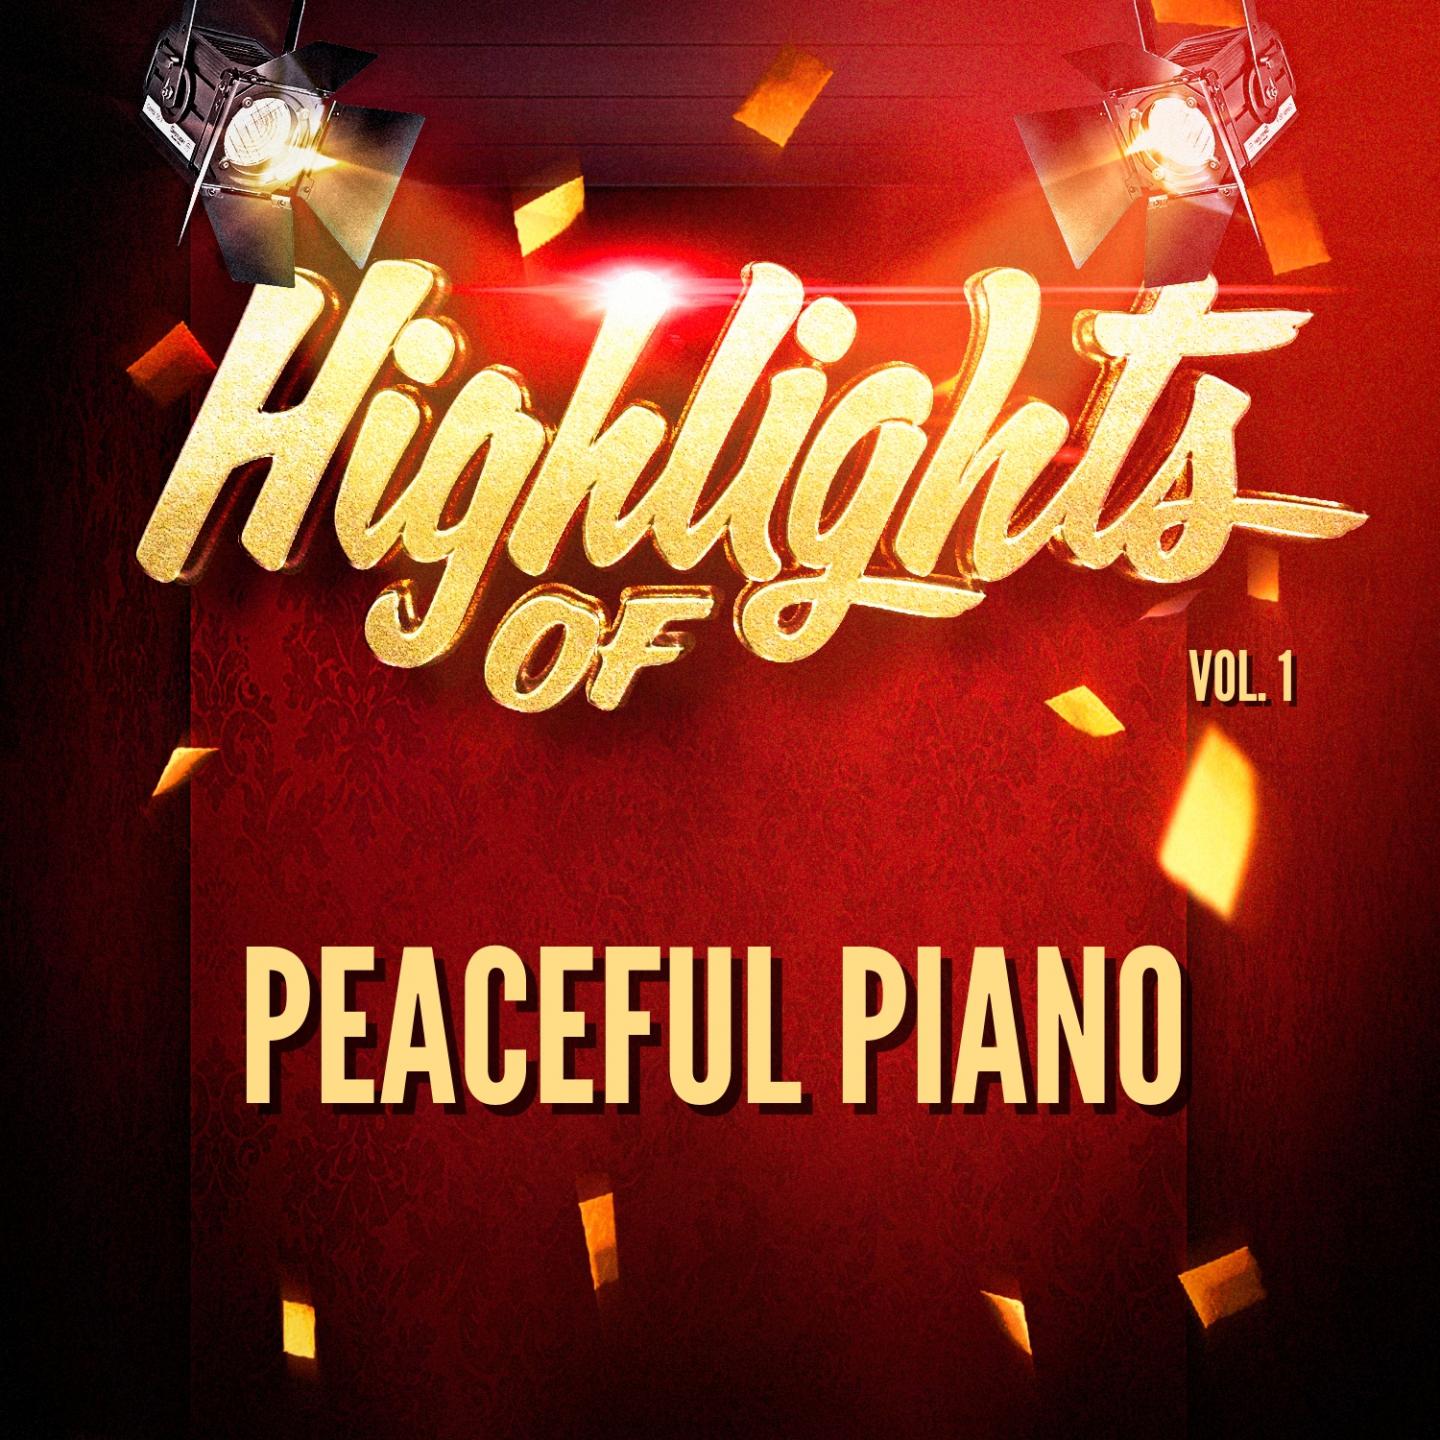 Highlights of Peaceful Piano, Vol. 1